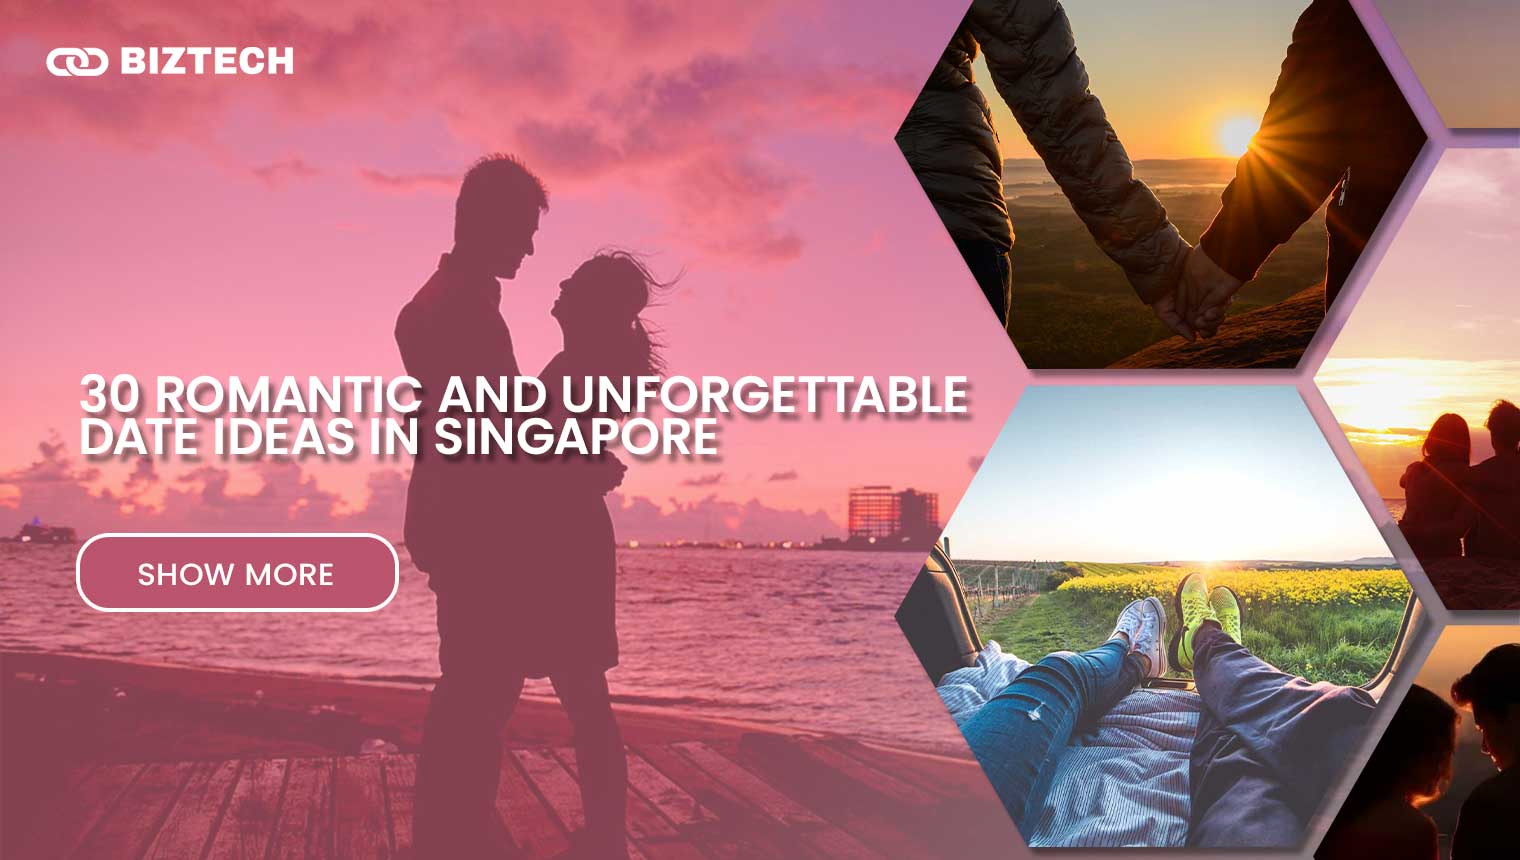 30 Romantic and Unforgettable Date Ideas in Singapore